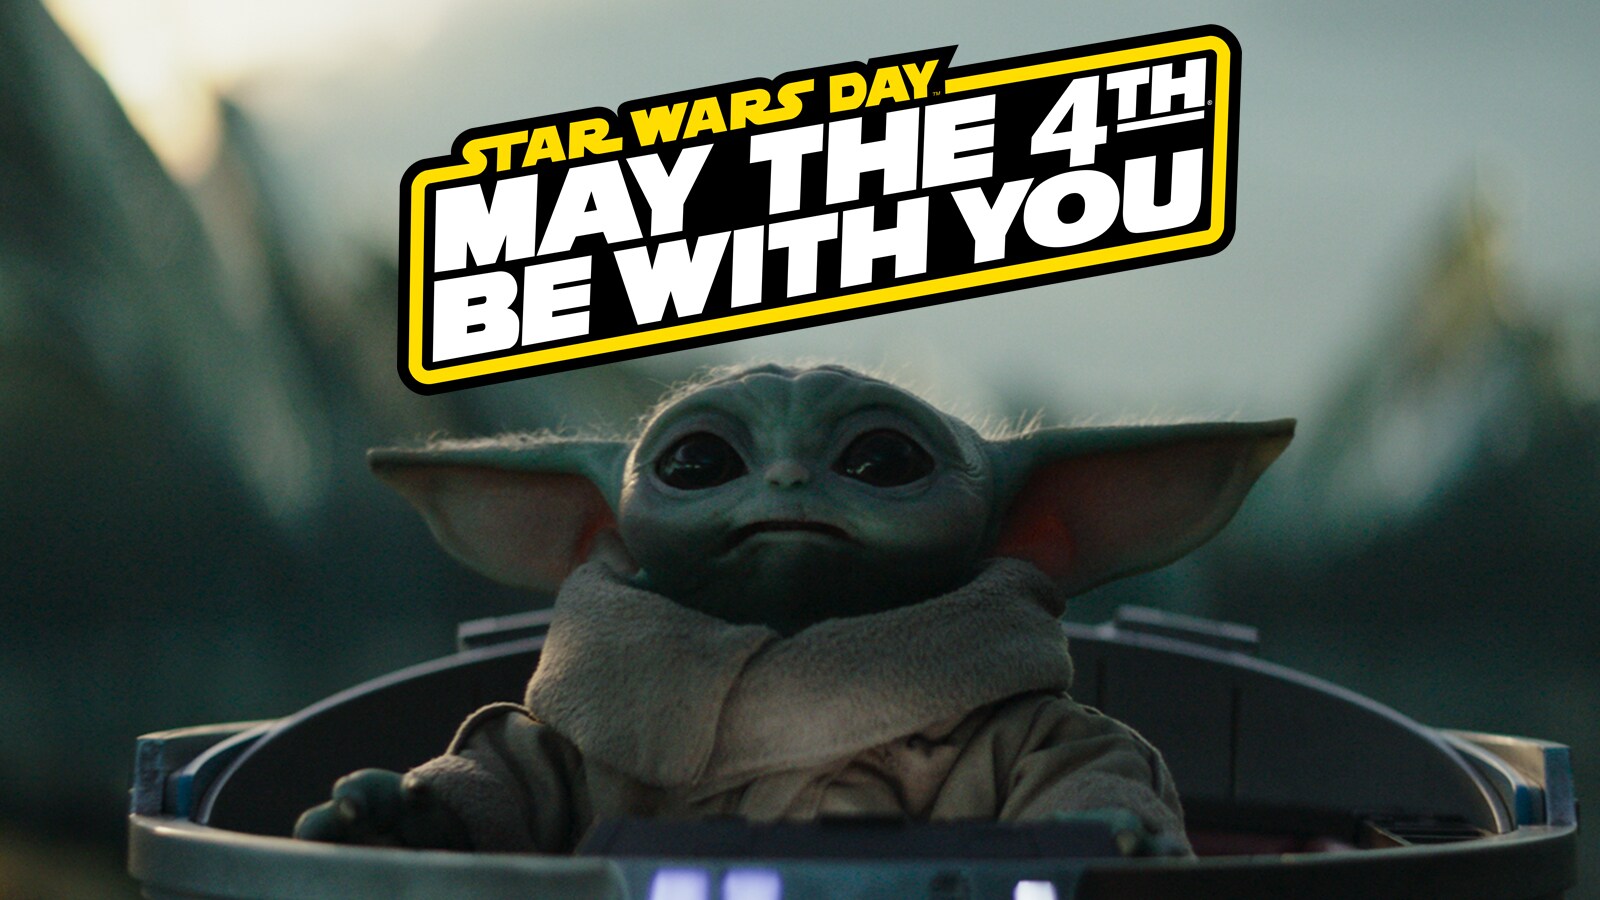 May the 4th Be With You! - I DO Y'ALL